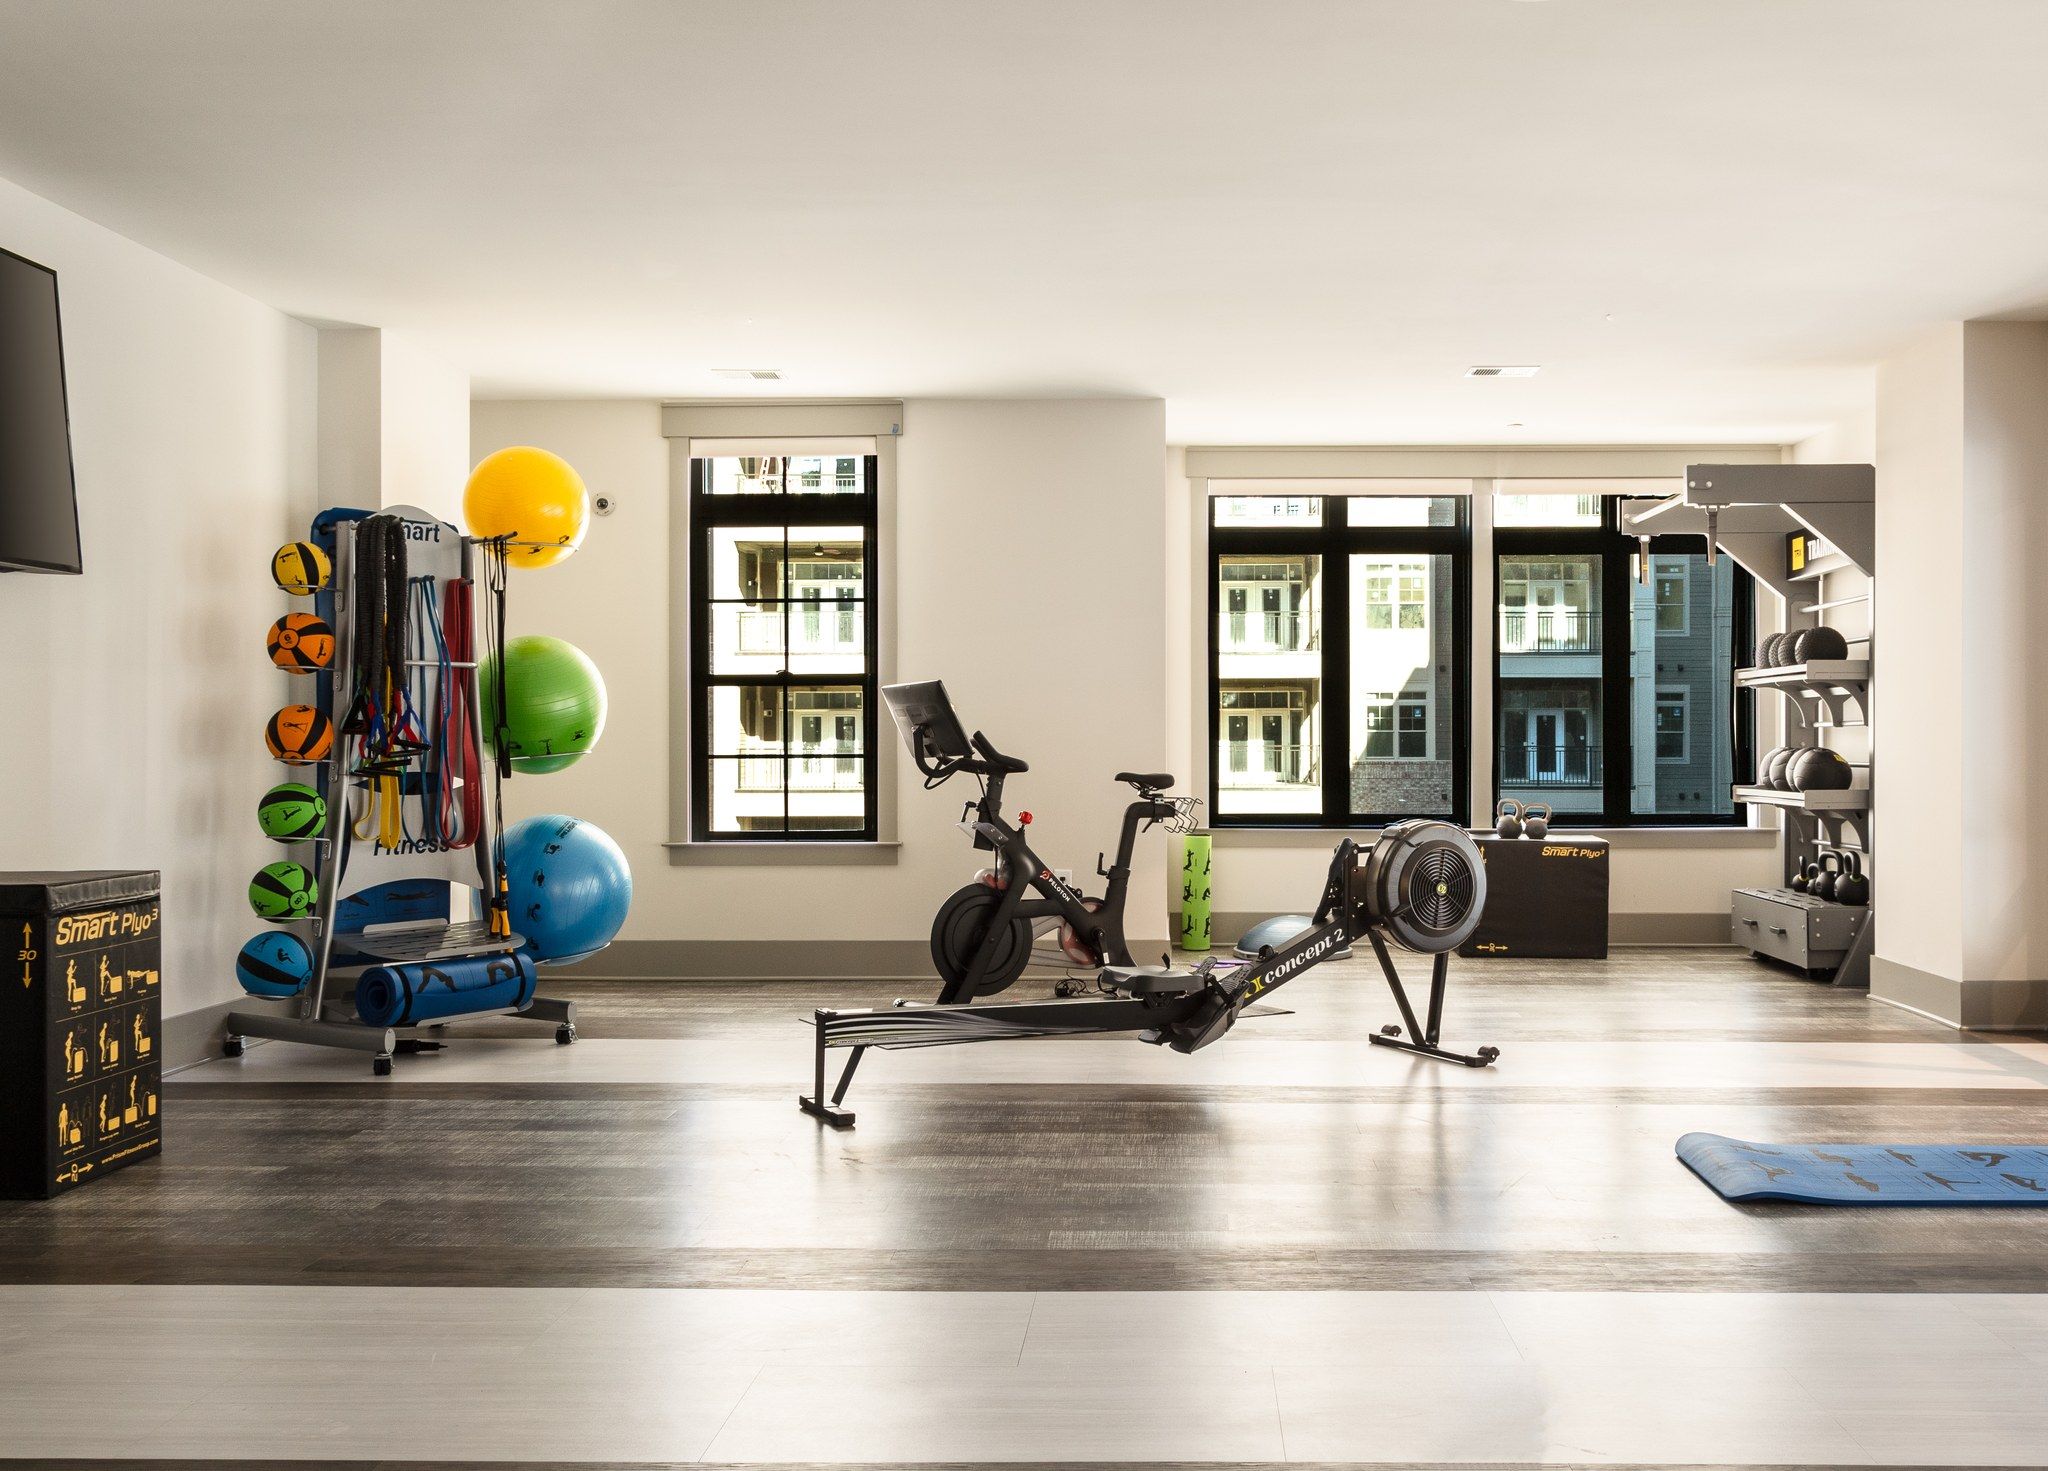 Apartment yoga studio with Concept2 rower, exercise balls, and yoga mats